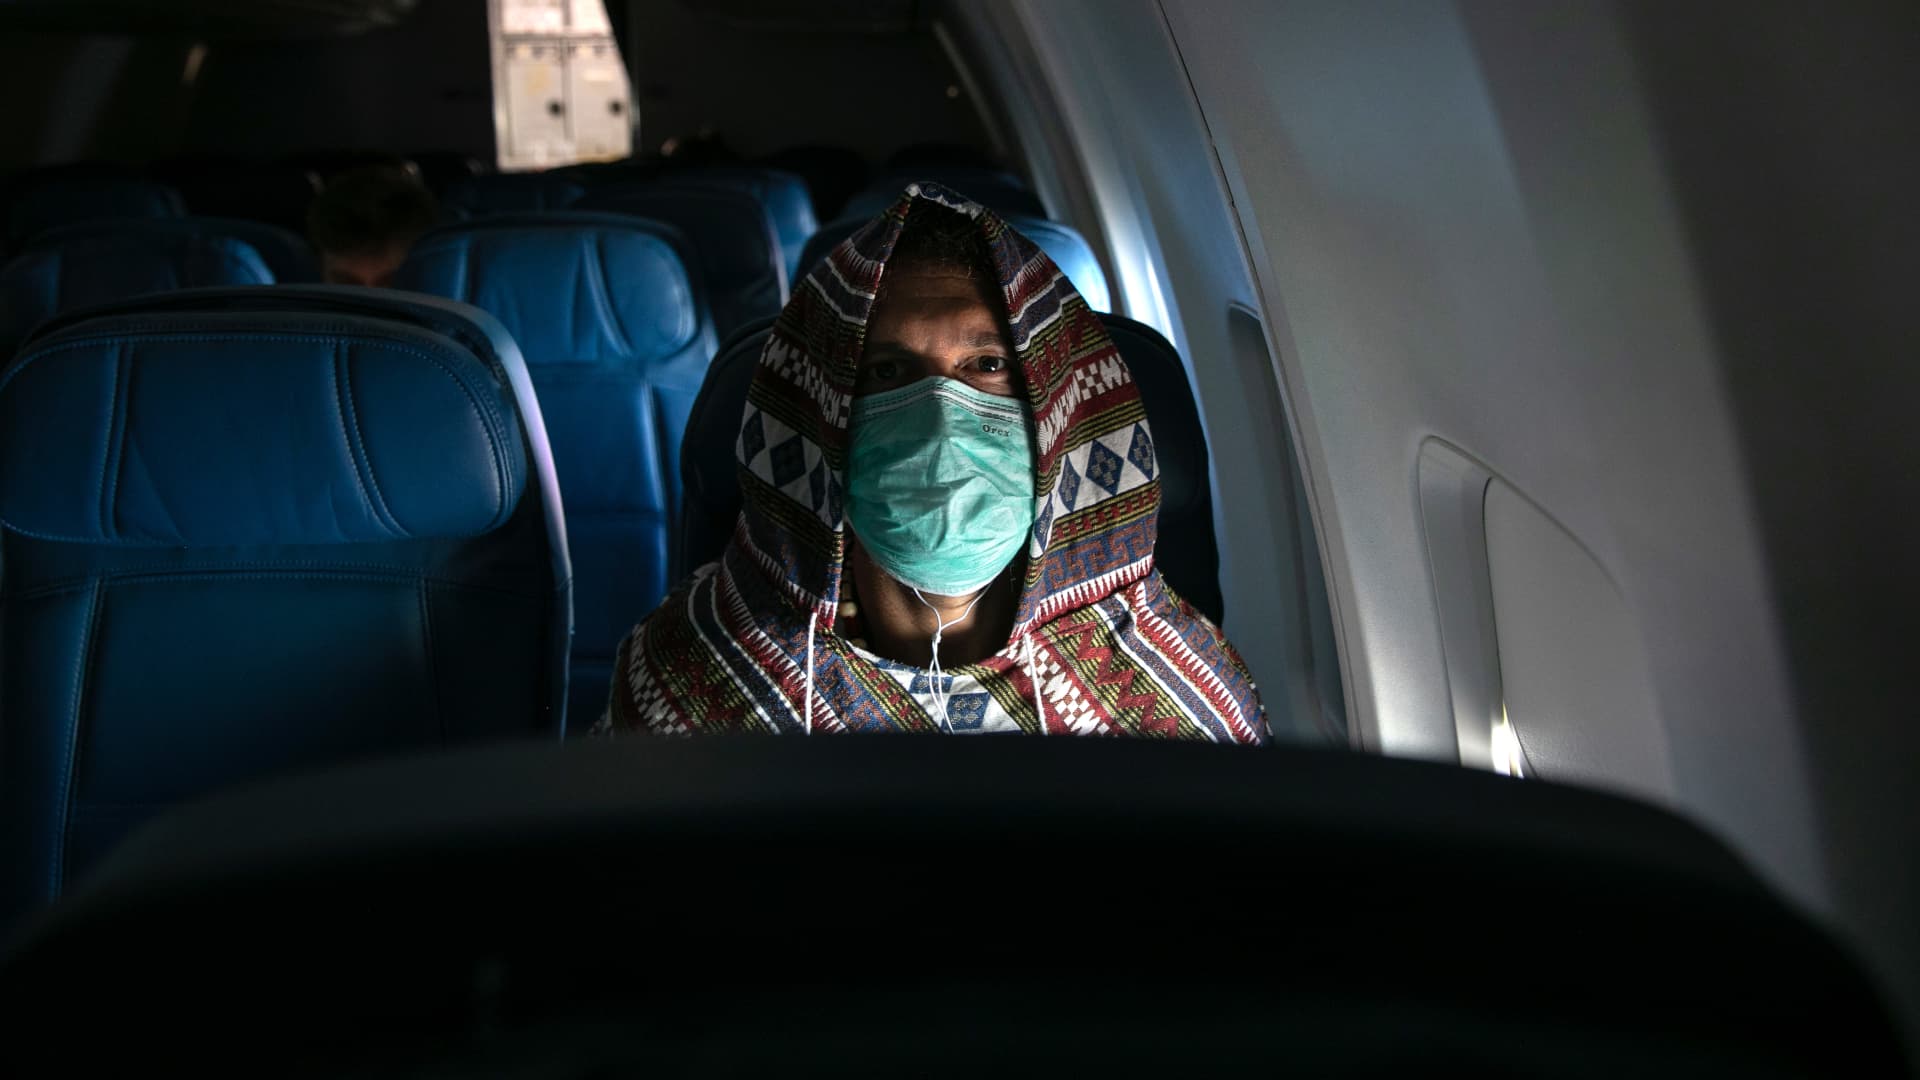 Adam Carver, 38, wears a mask to protect against coronavirus while on a nearly empty Delta flight from Seattle-Tacoma International Airport o JFK on March 15, 2020 near New York City.